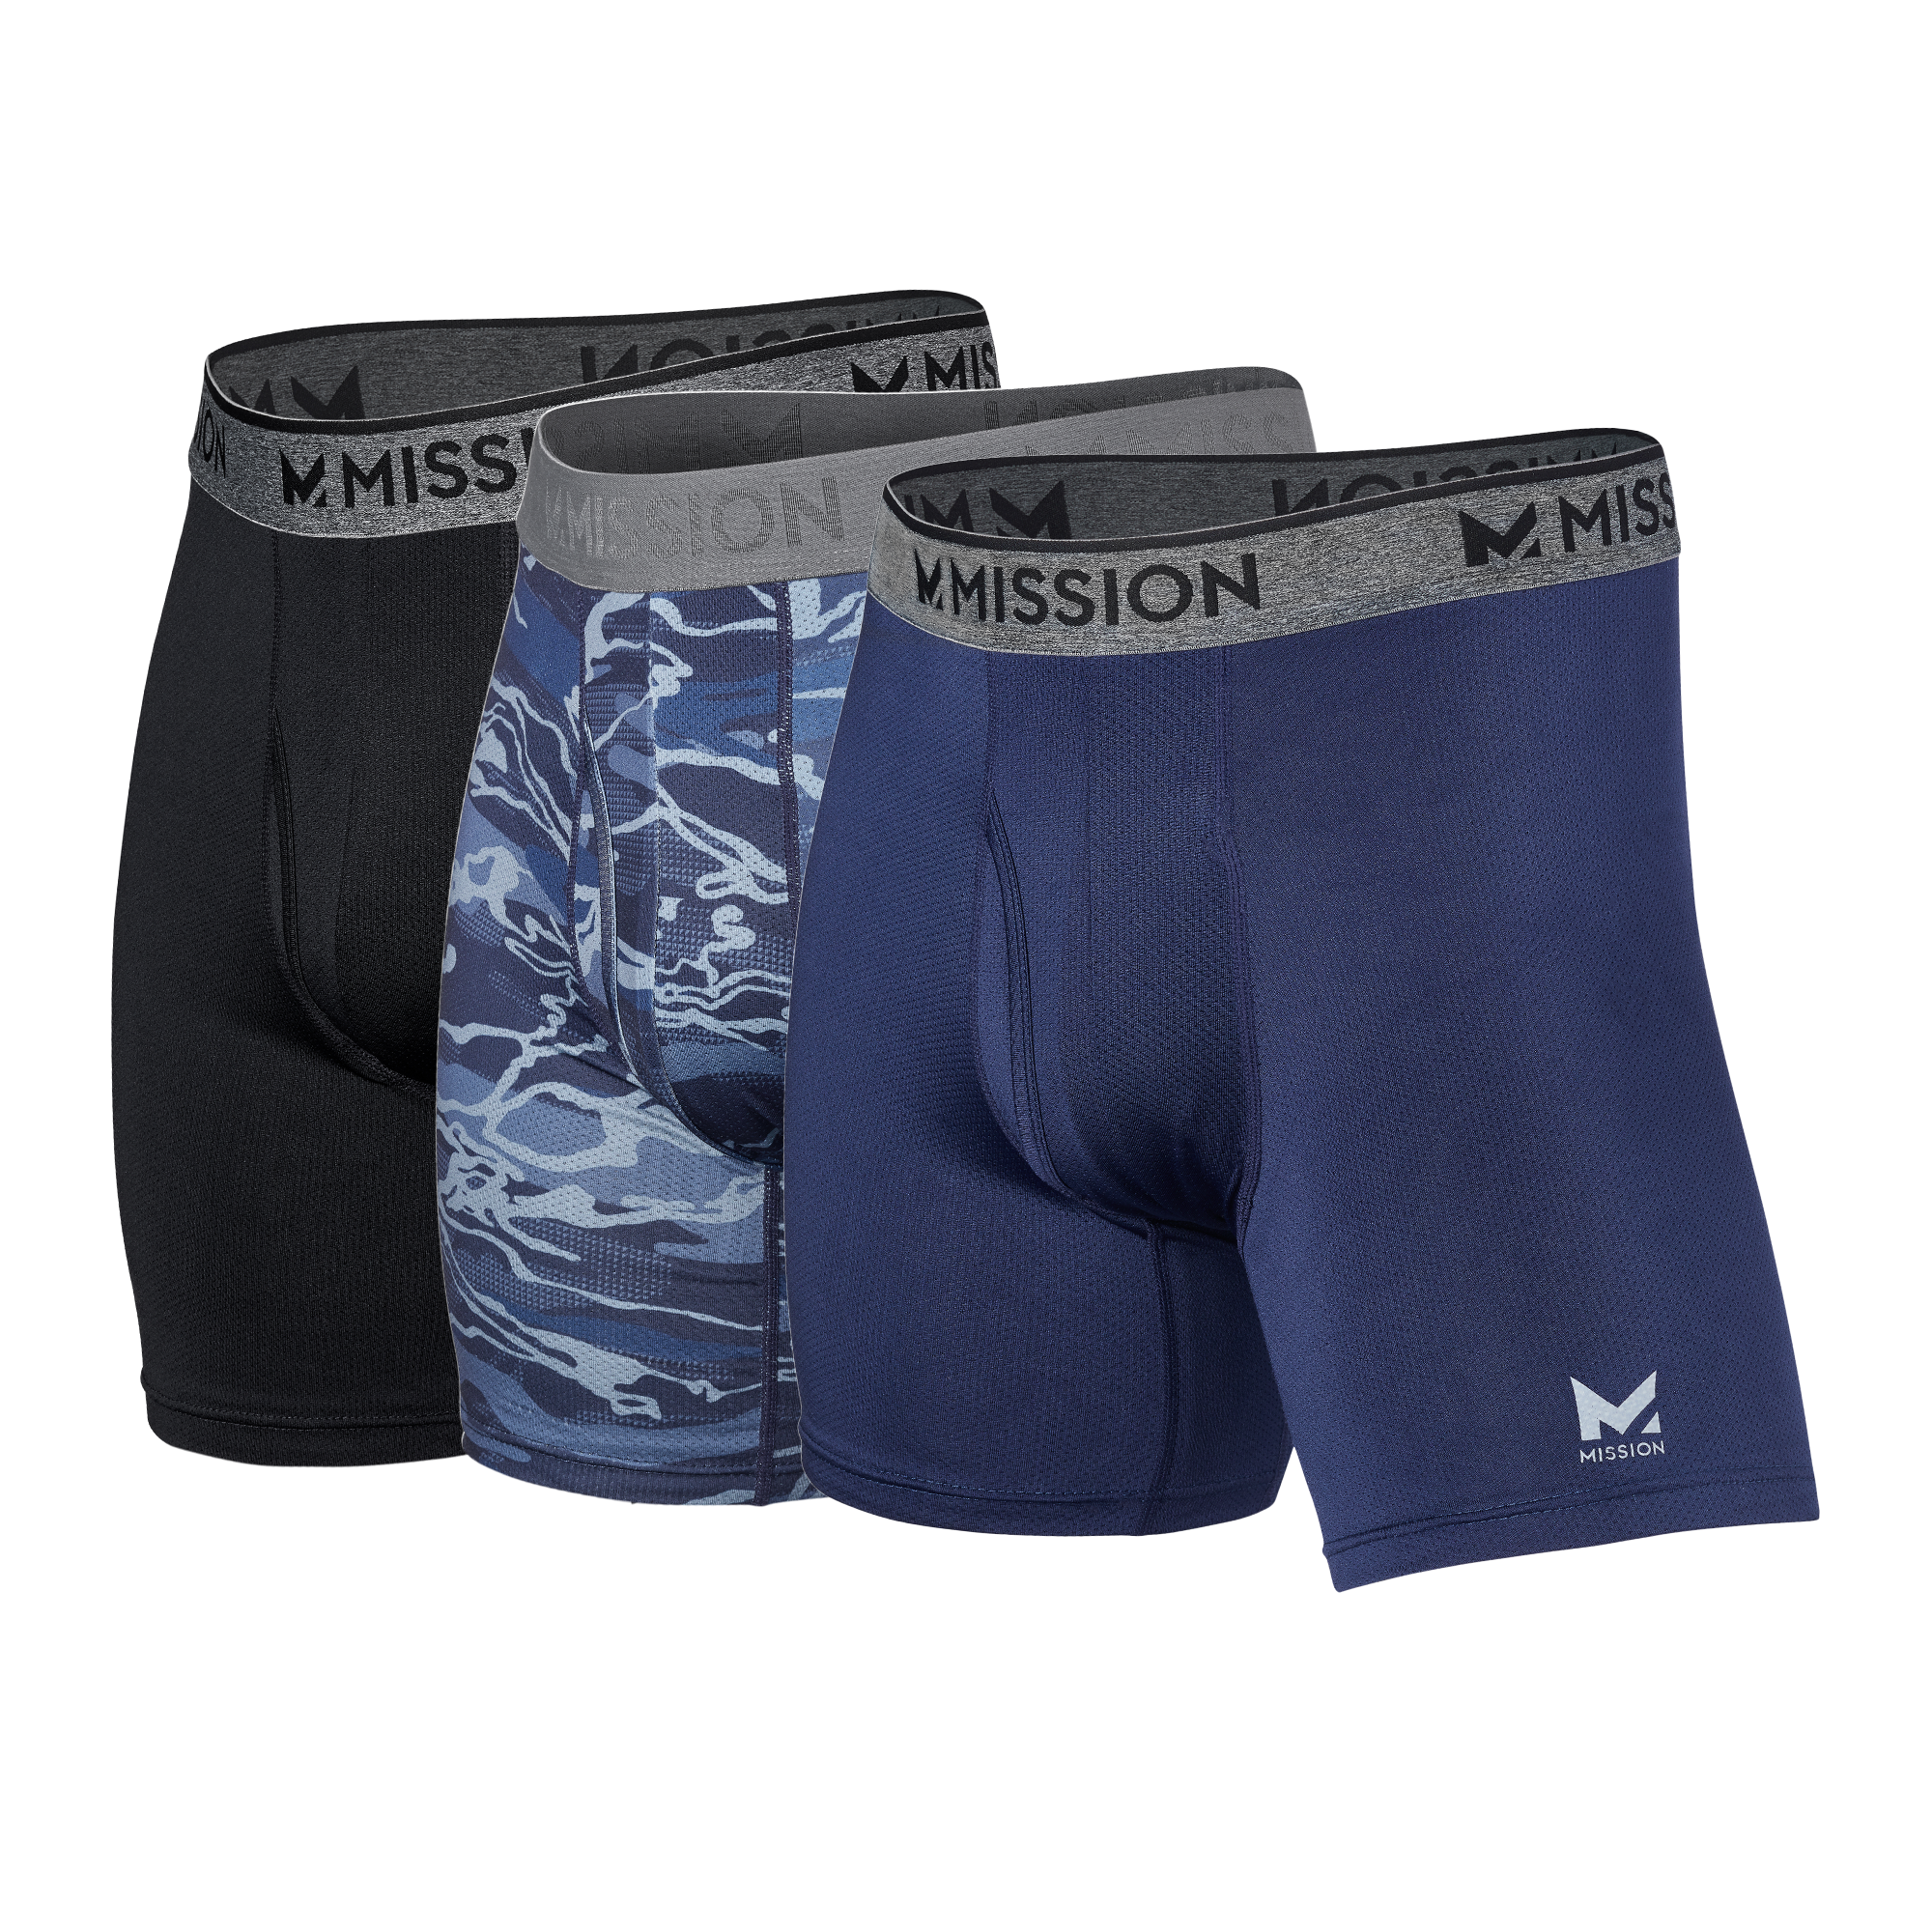 Image of Performance Mesh Boxer Briefs